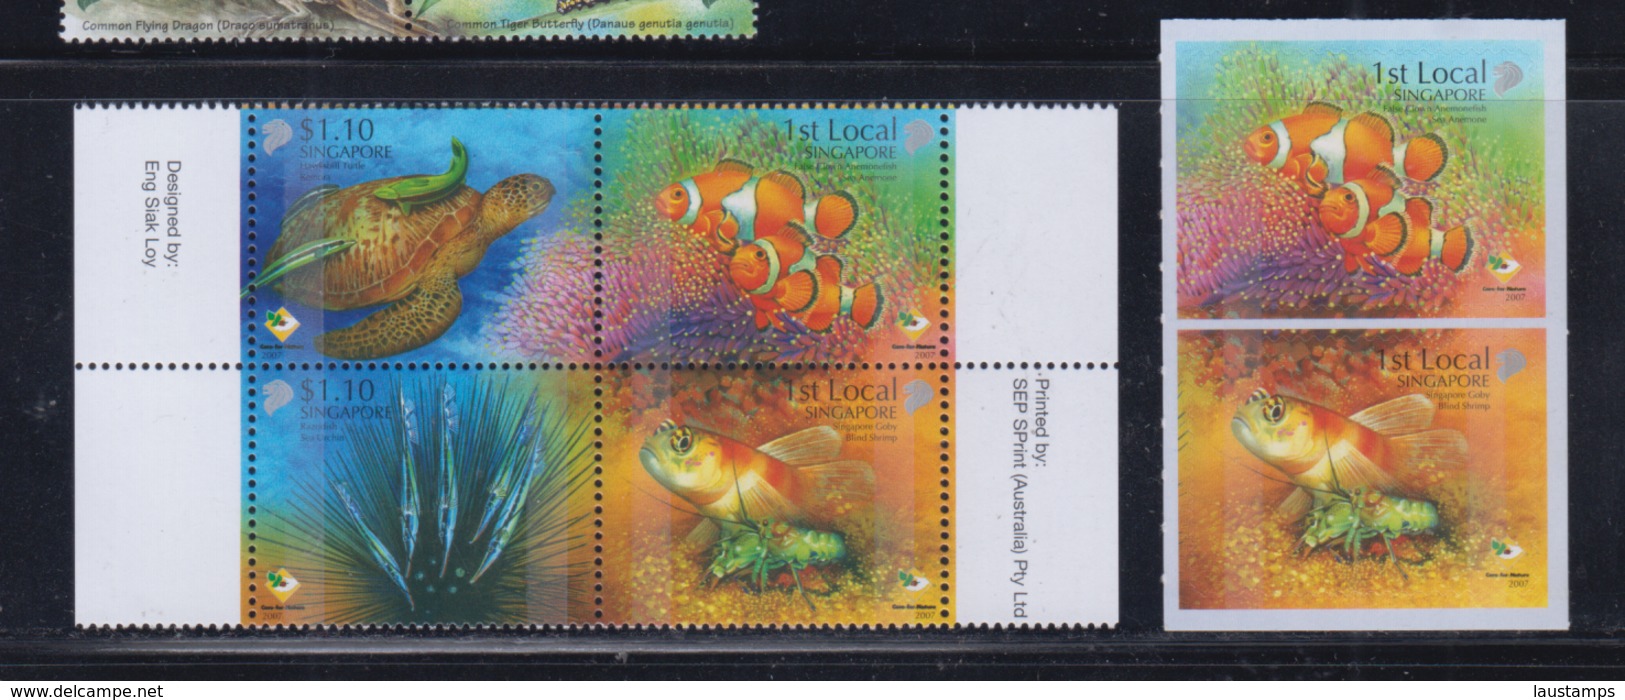 Singapore 2007 Shores And Reefs, Turtle, Fishes Care For Nature Block + Booklet Stamp MNH - Singapur (1959-...)